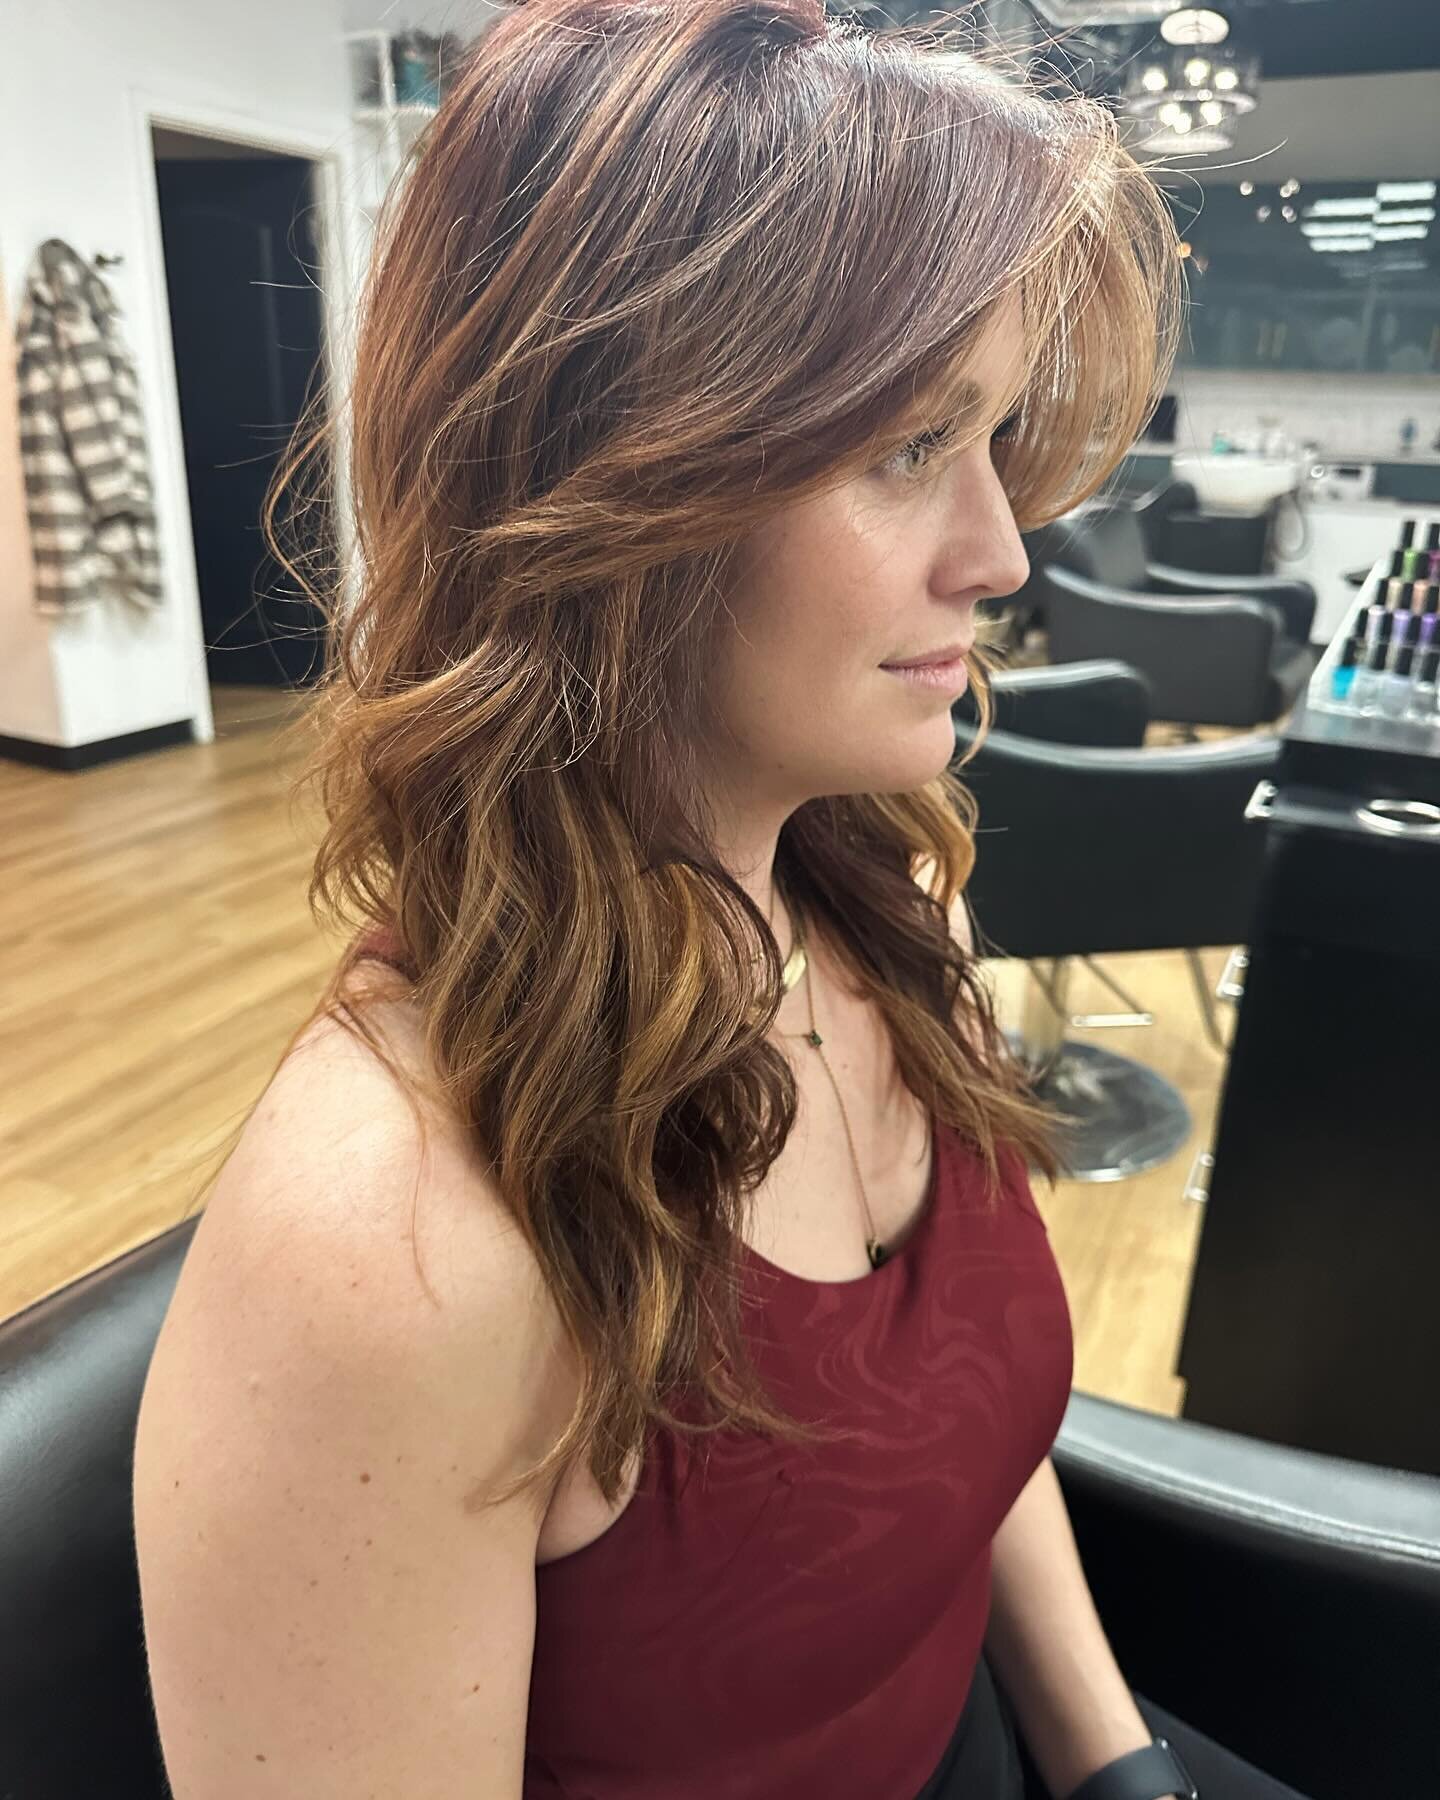 Reds be right

Highlights, foilyage, toners oh my

#DenverHair, #Hairstylist, #ColorSpecialist, #RedHair, #HairHighlights, #HairGoals, #HairColorMagic, #DenverSalon, #HairTransformation, #VibrantRed, #SalonLife, #DenverBeauty, #BoldColor, #StylistLif